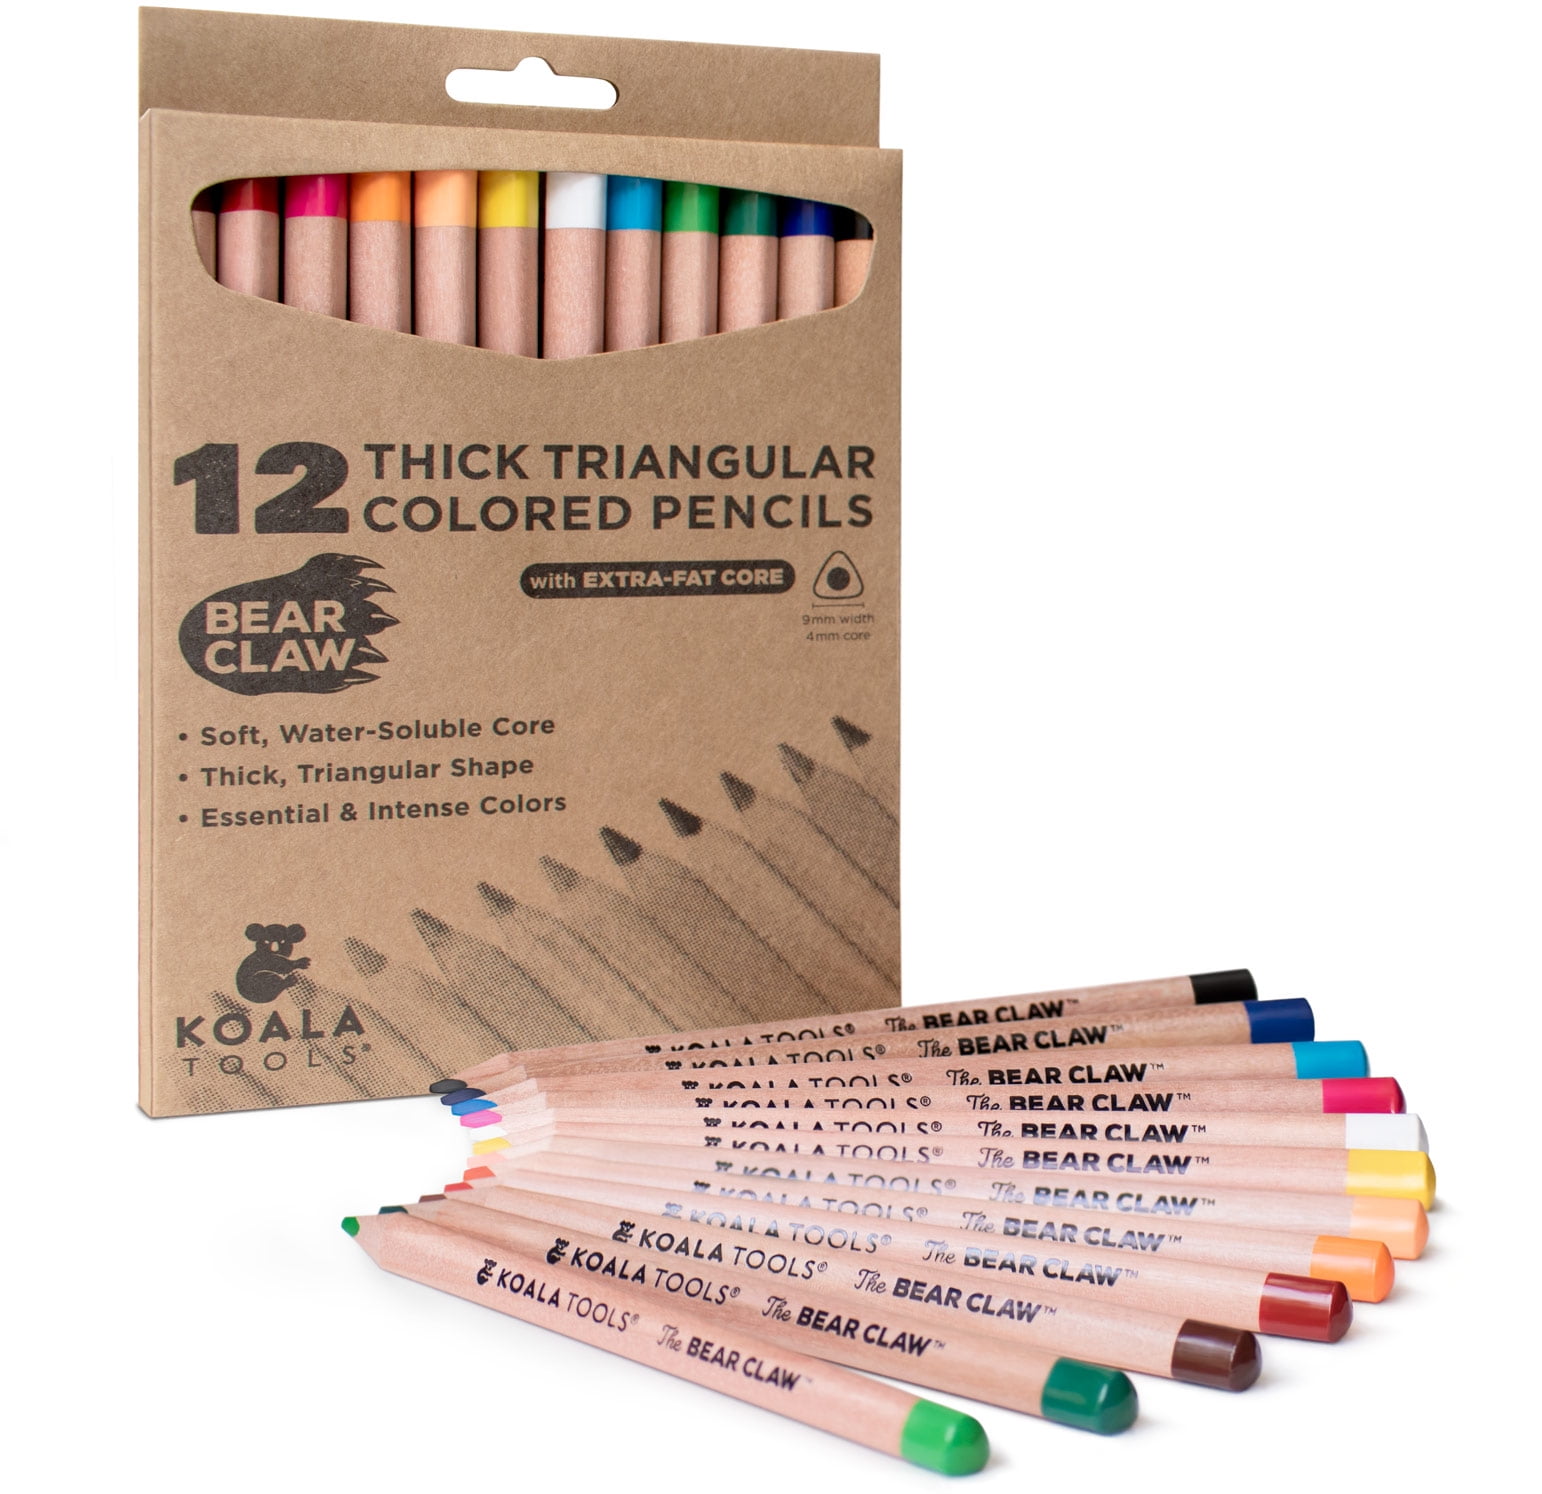  Sketch Pencils For Drawing,41 Piece Drawing Pencils